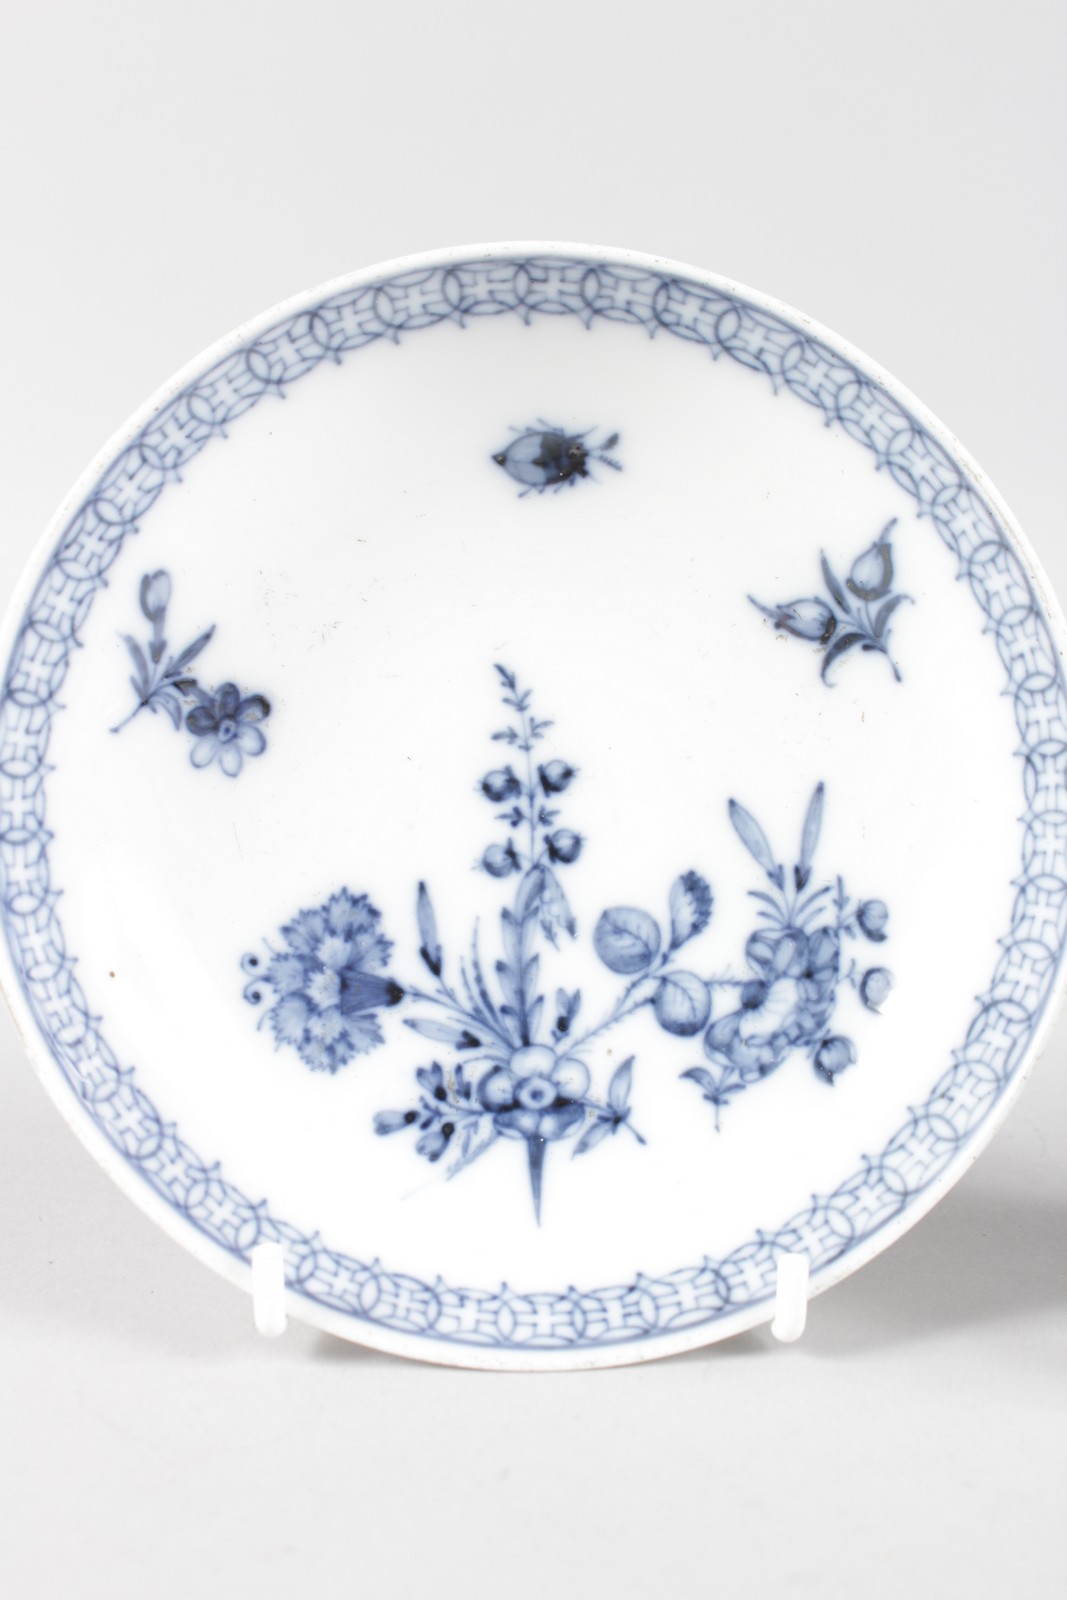 AN 18TH CENTURY MEISSEN BLUE AND WHITE CUP AND SAUCER. - Image 2 of 8